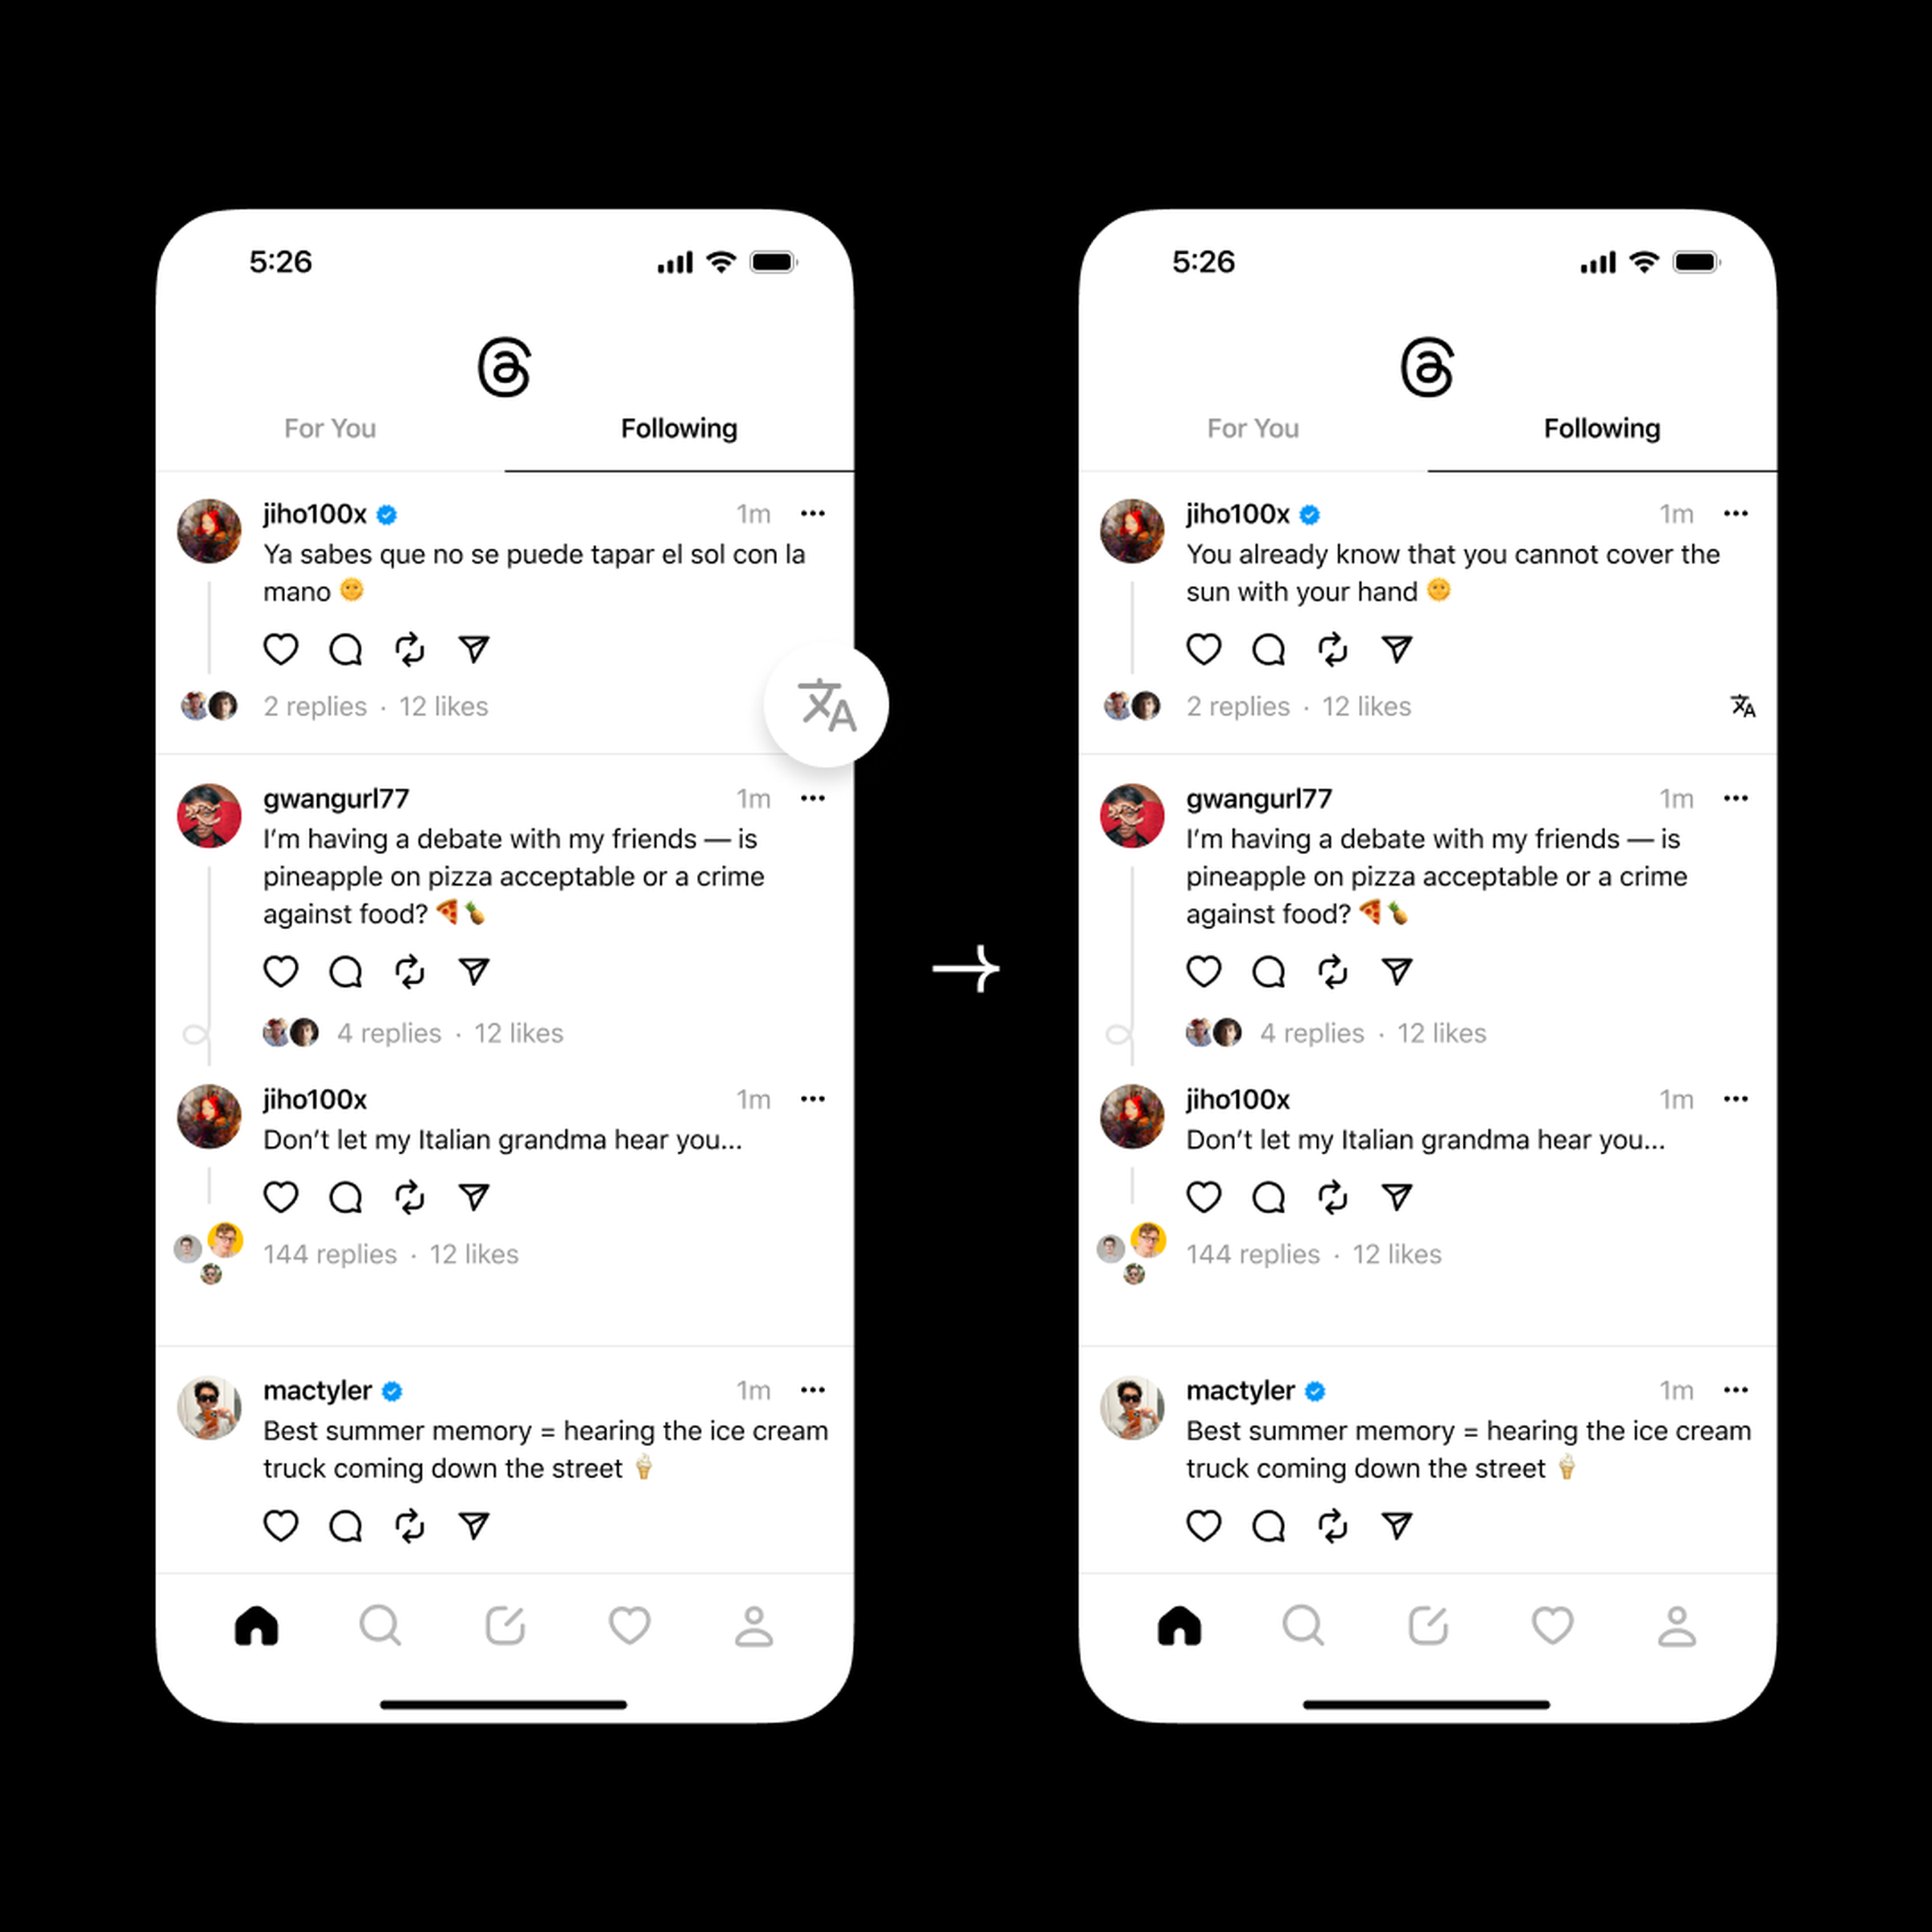 A picture of two phone screens side-by-side with the following feed, showcasing translations.